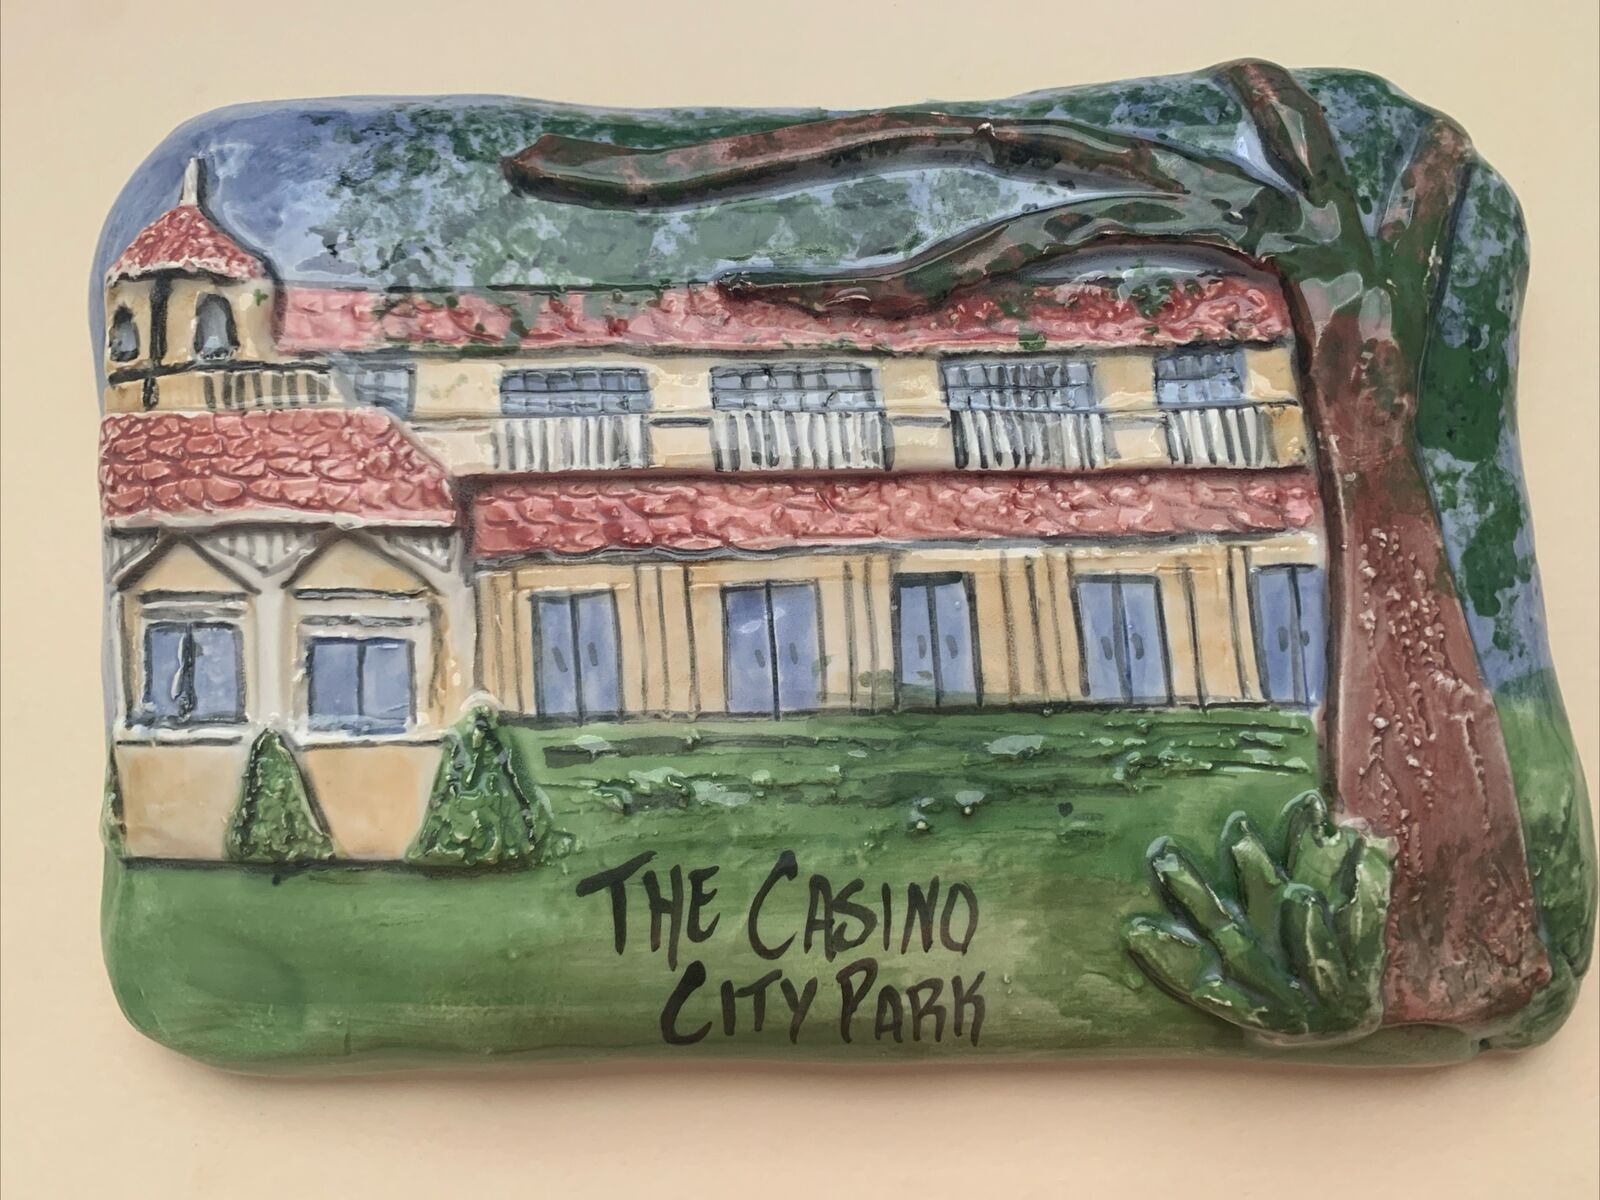 NEW ORLEANS CLAY CREATIONS HAND PAINTED WALL PLAQUE- CASINO CITY PARK